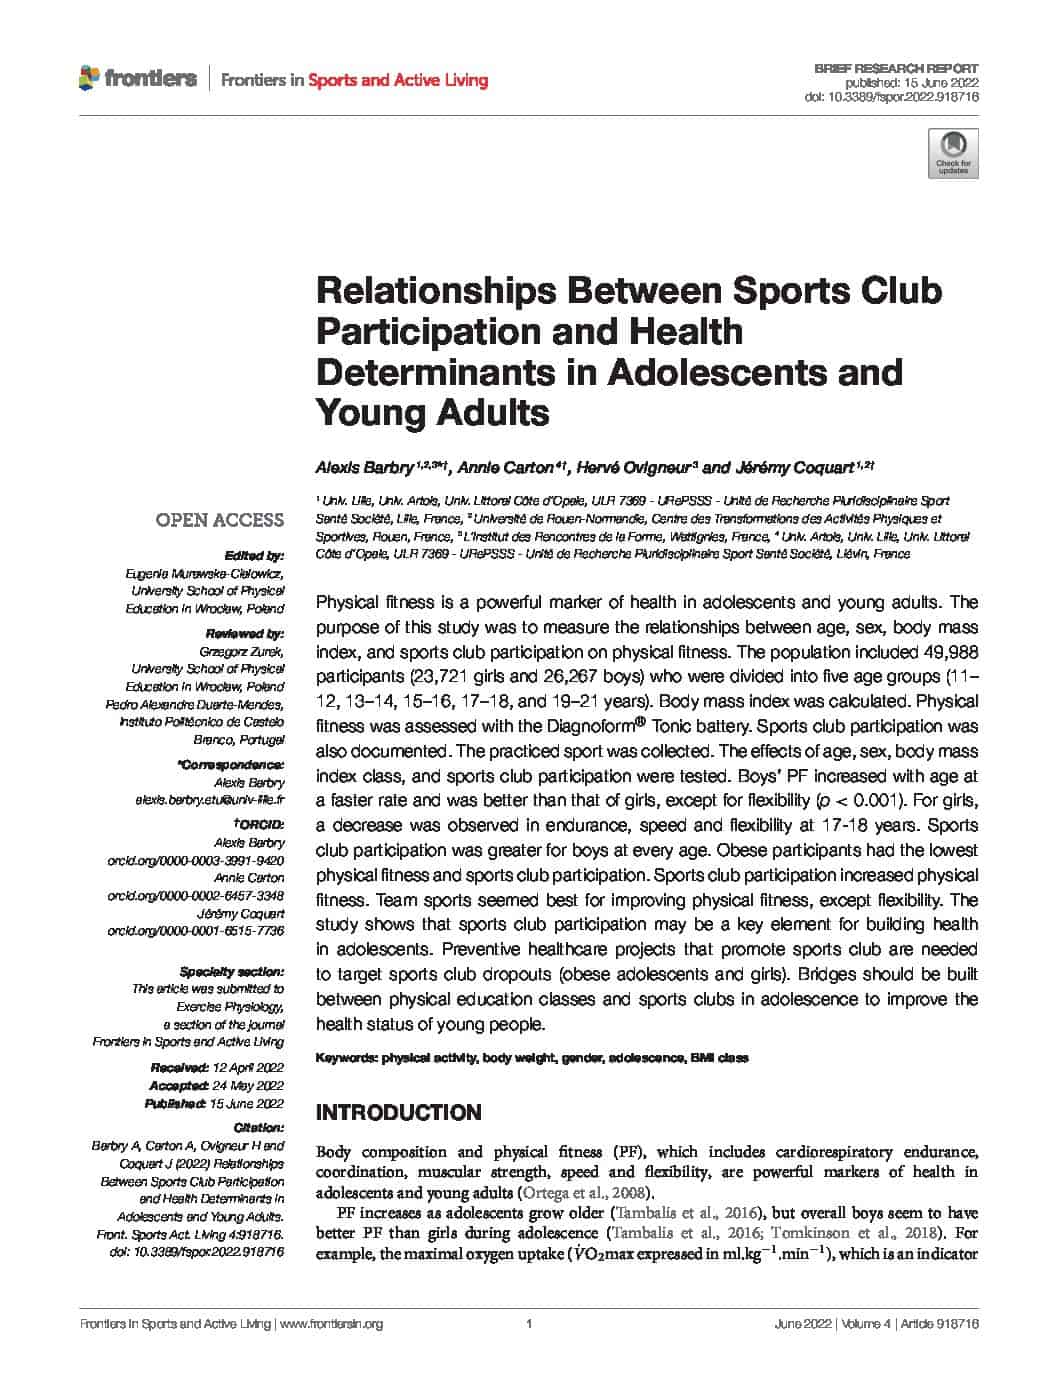 Frontiers in Sports and Active Living